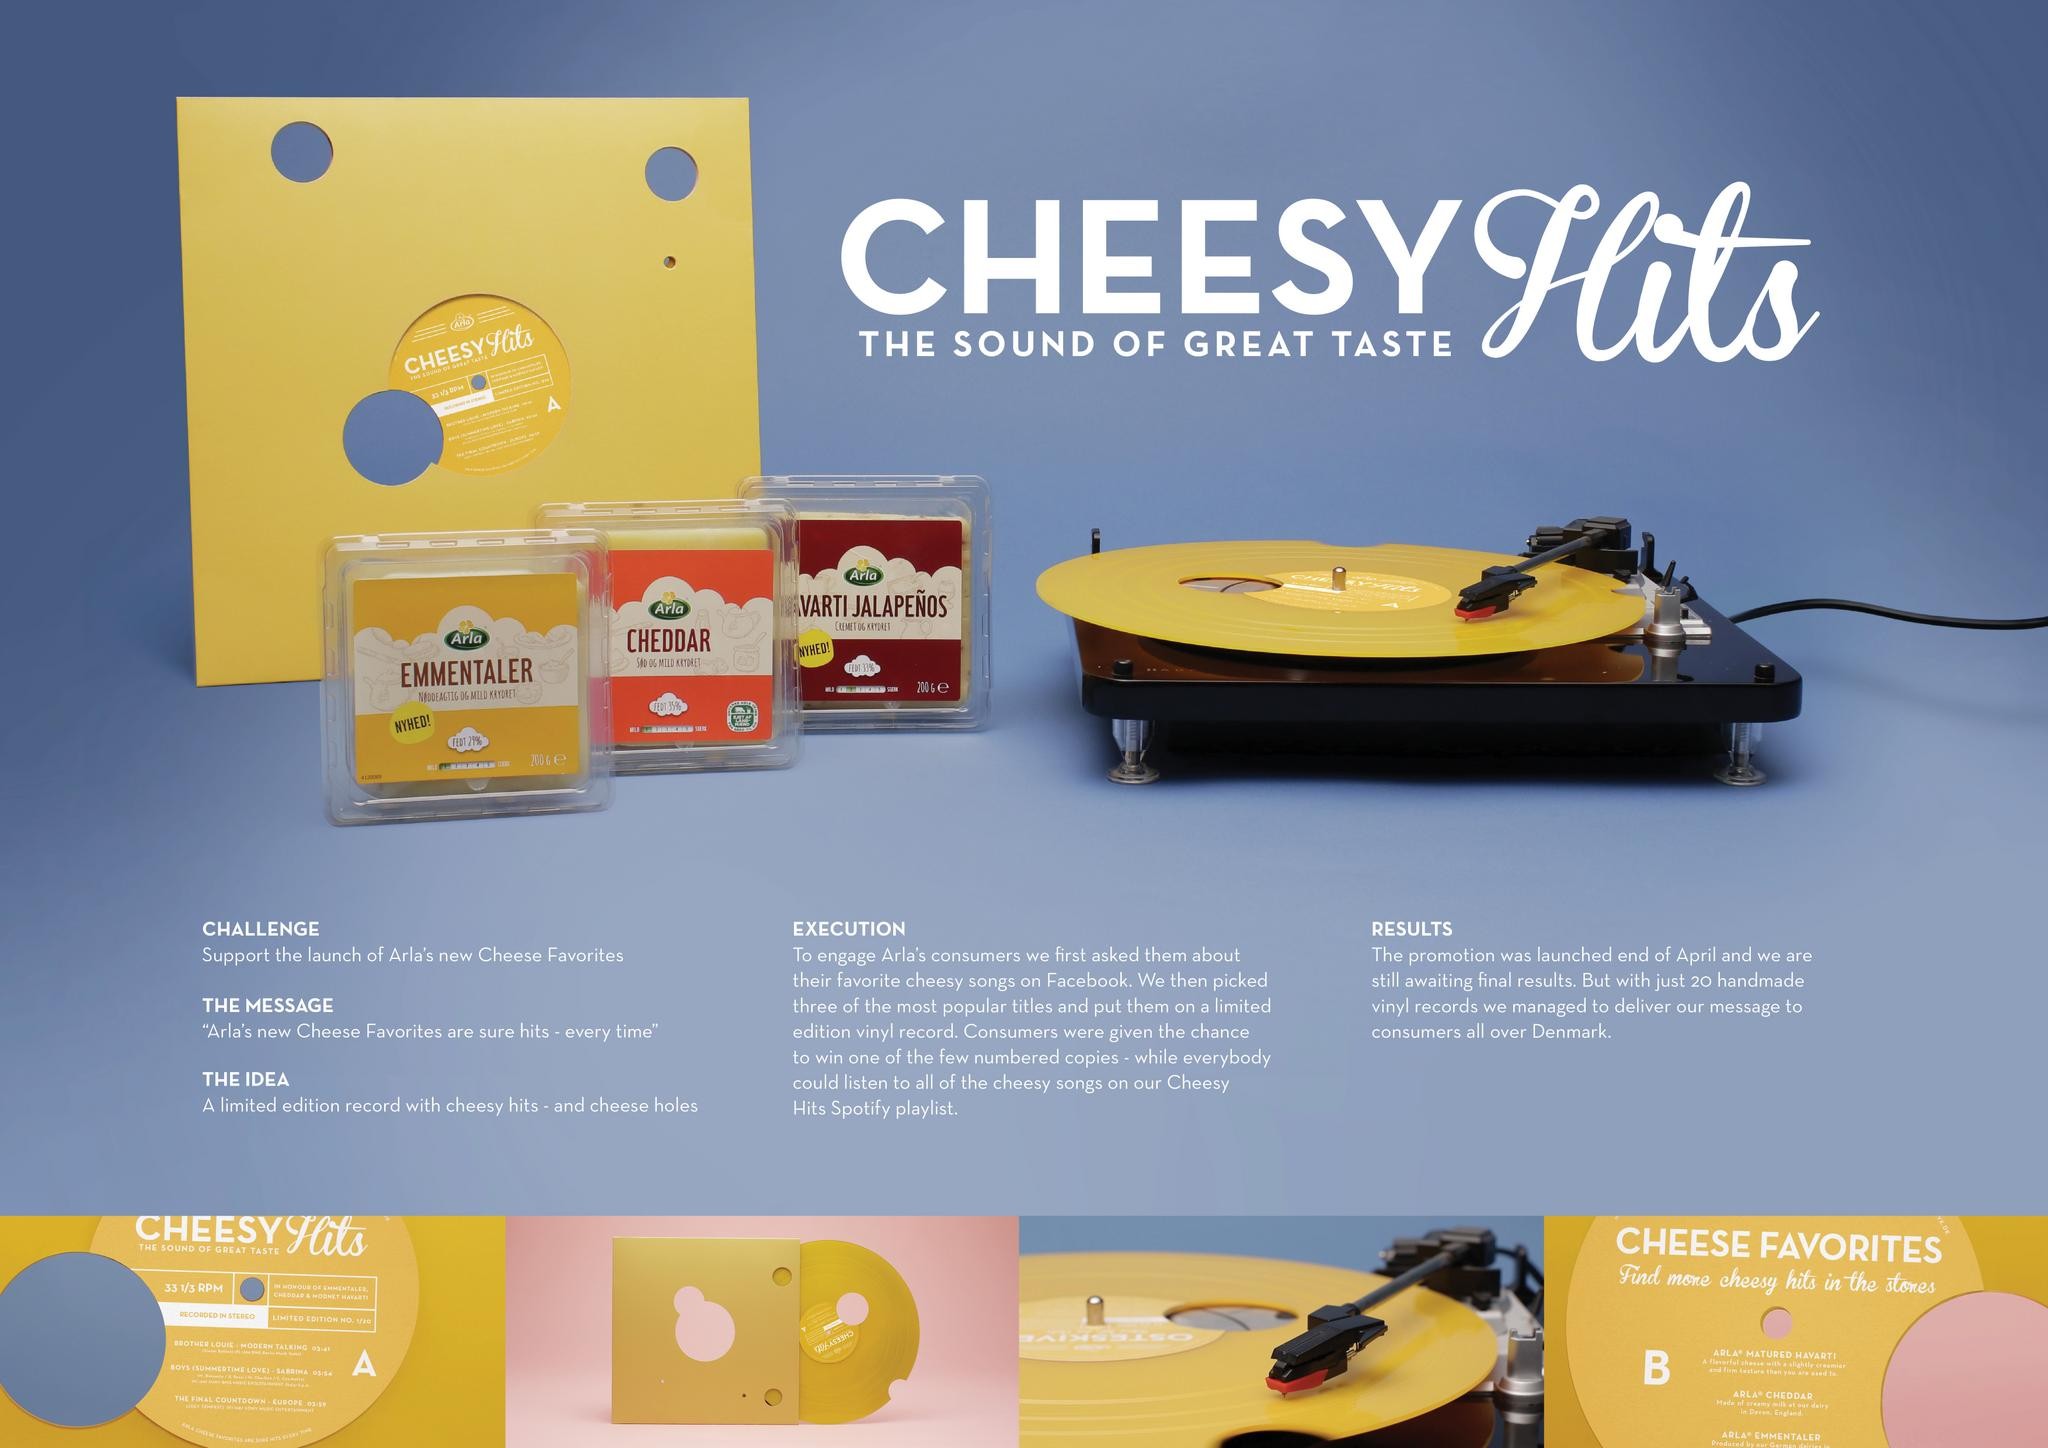 CHEESY HITS - THE SOUND OF GREAT TASTE